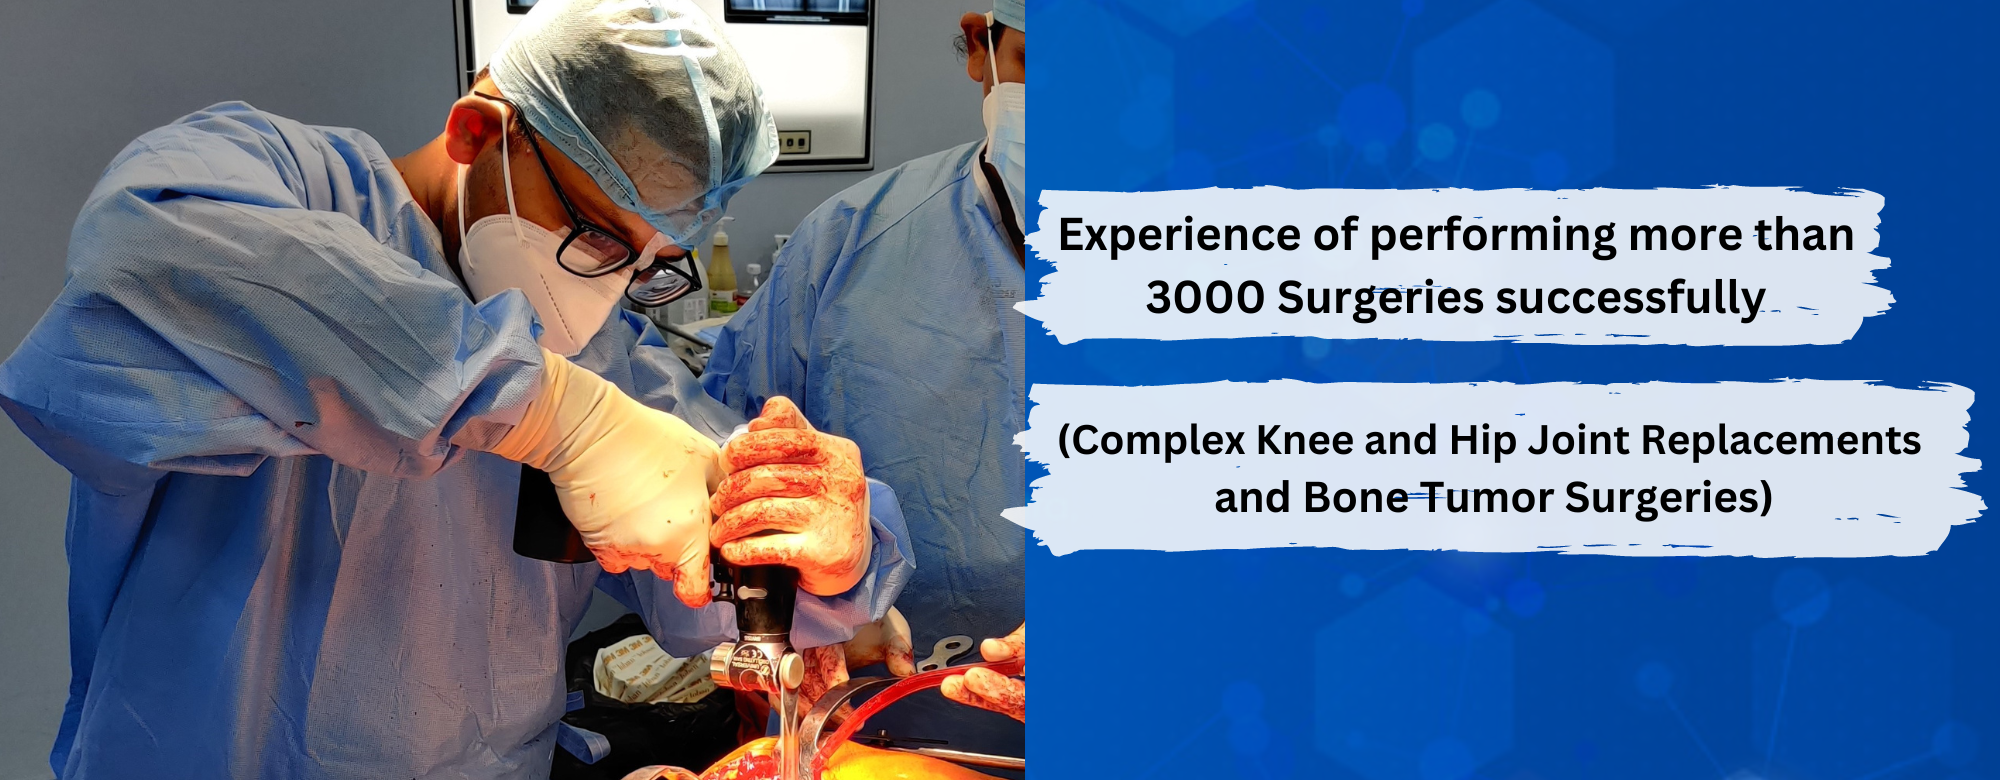 Experience of performing more than 3000 Surgeries successfully (6)